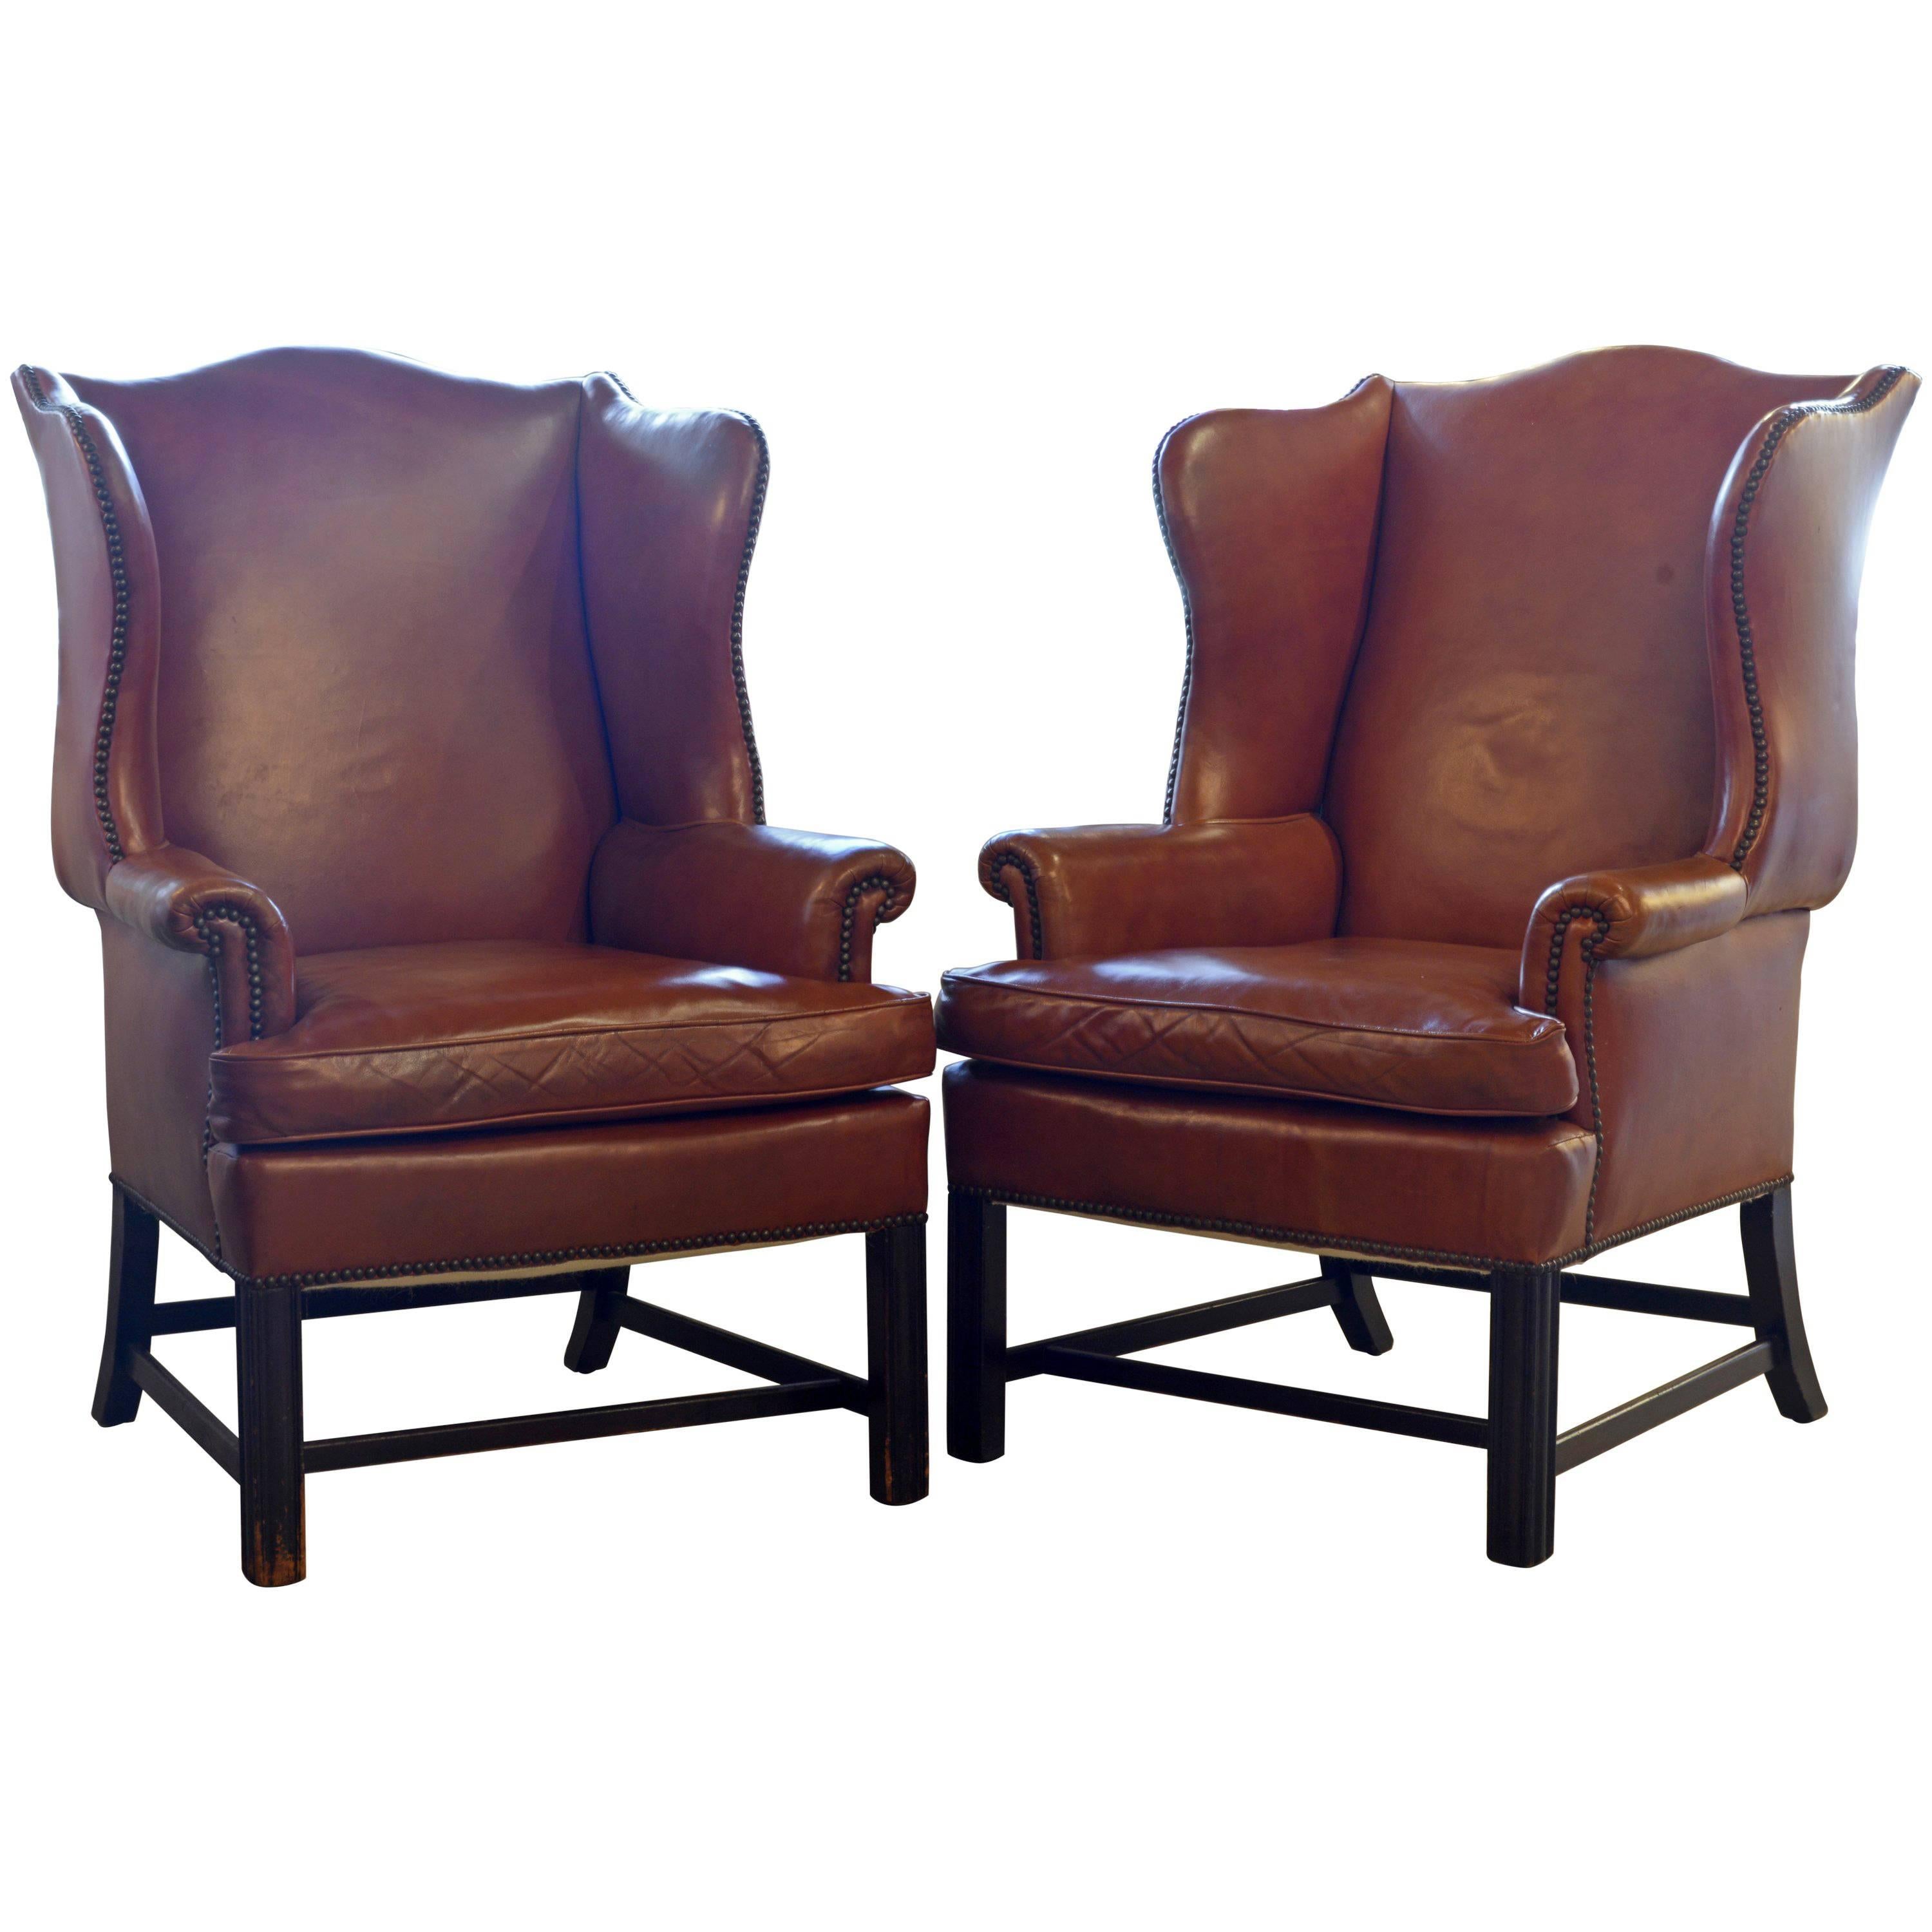 Pair of Exquisite Vintage Georgian Style Wing Back Leather Armchairs